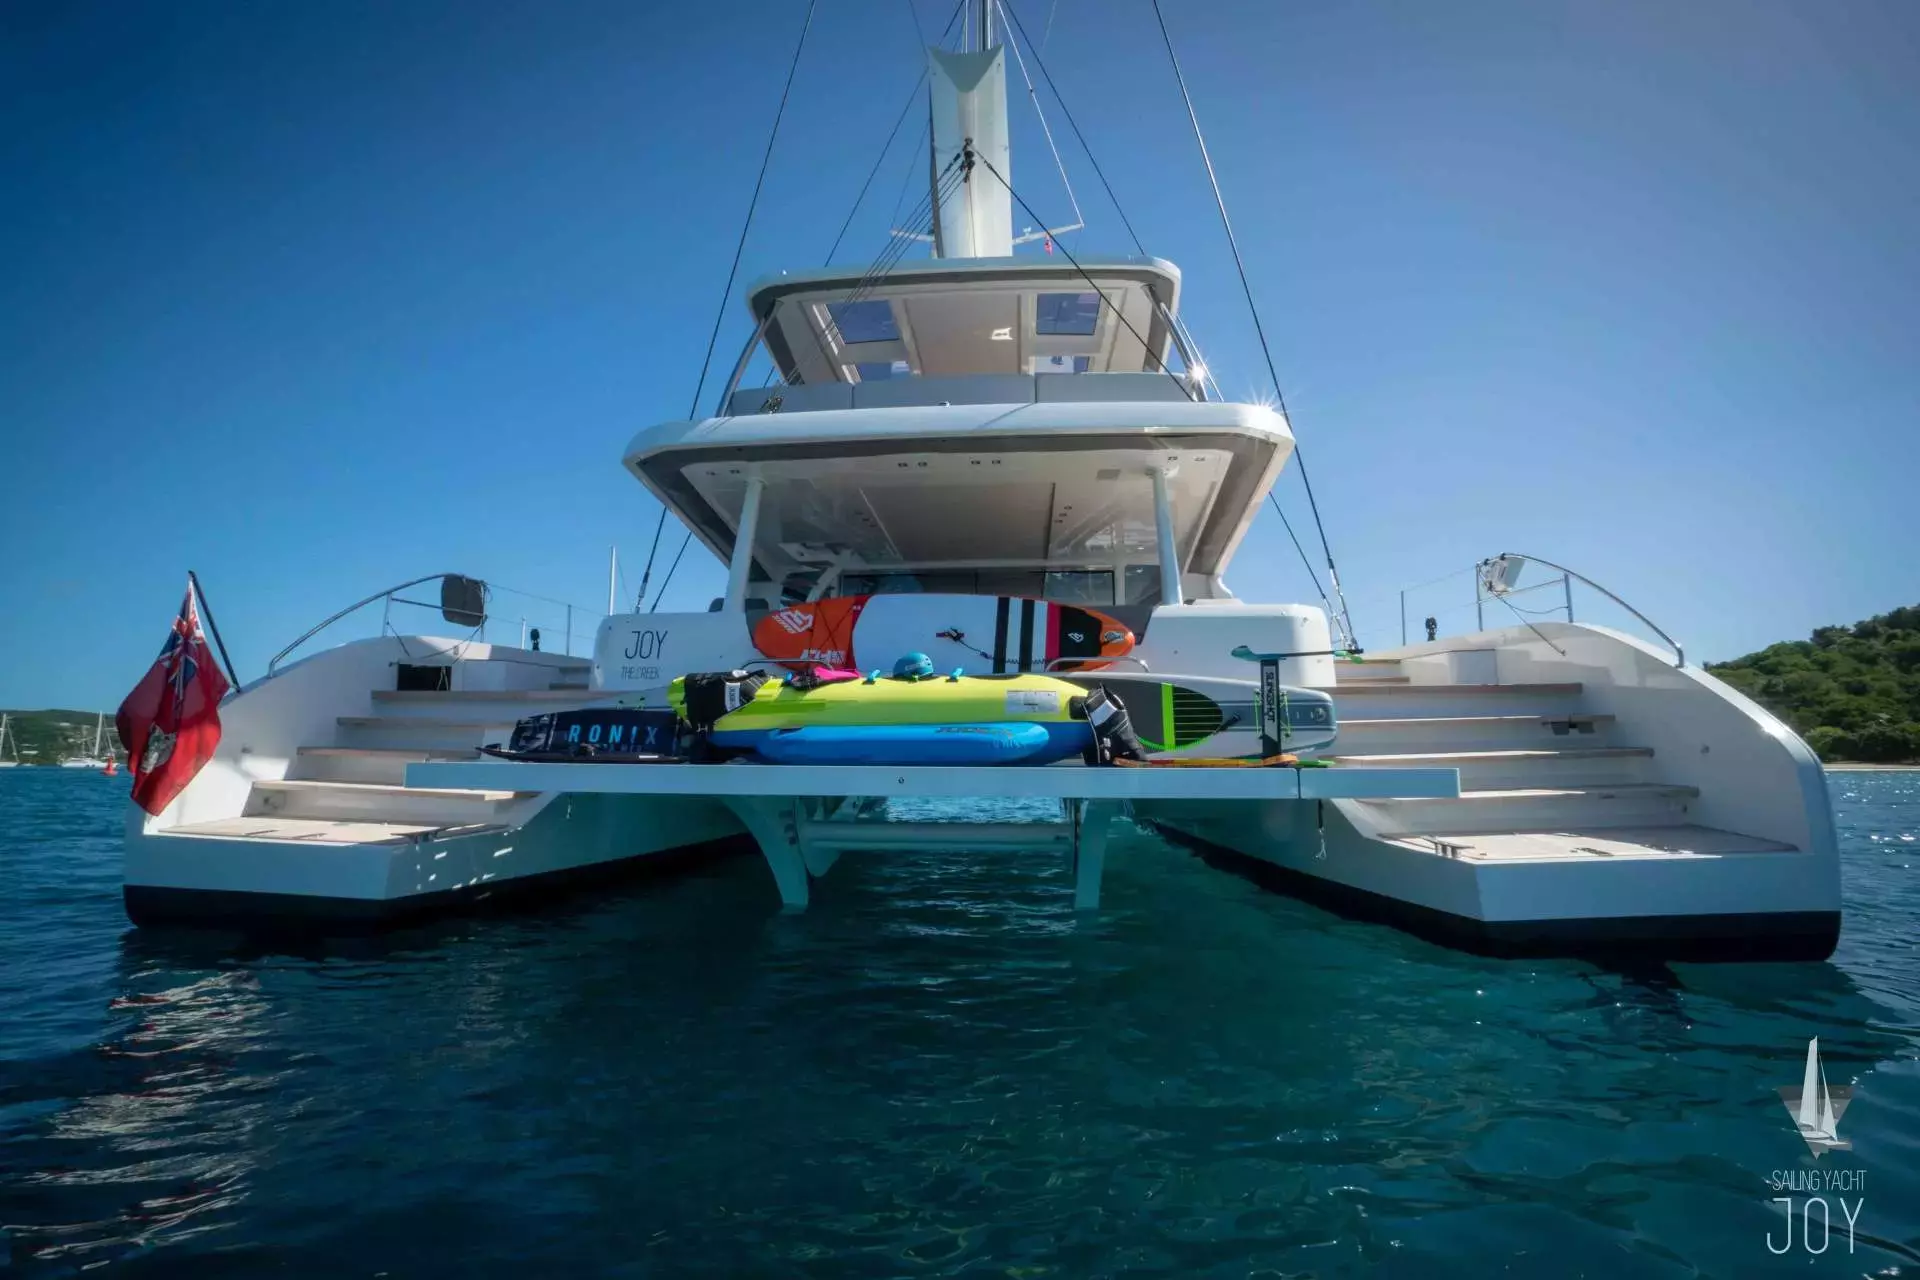 Joy II by Lagoon - Top rates for a Rental of a private Luxury Catamaran in Fiji